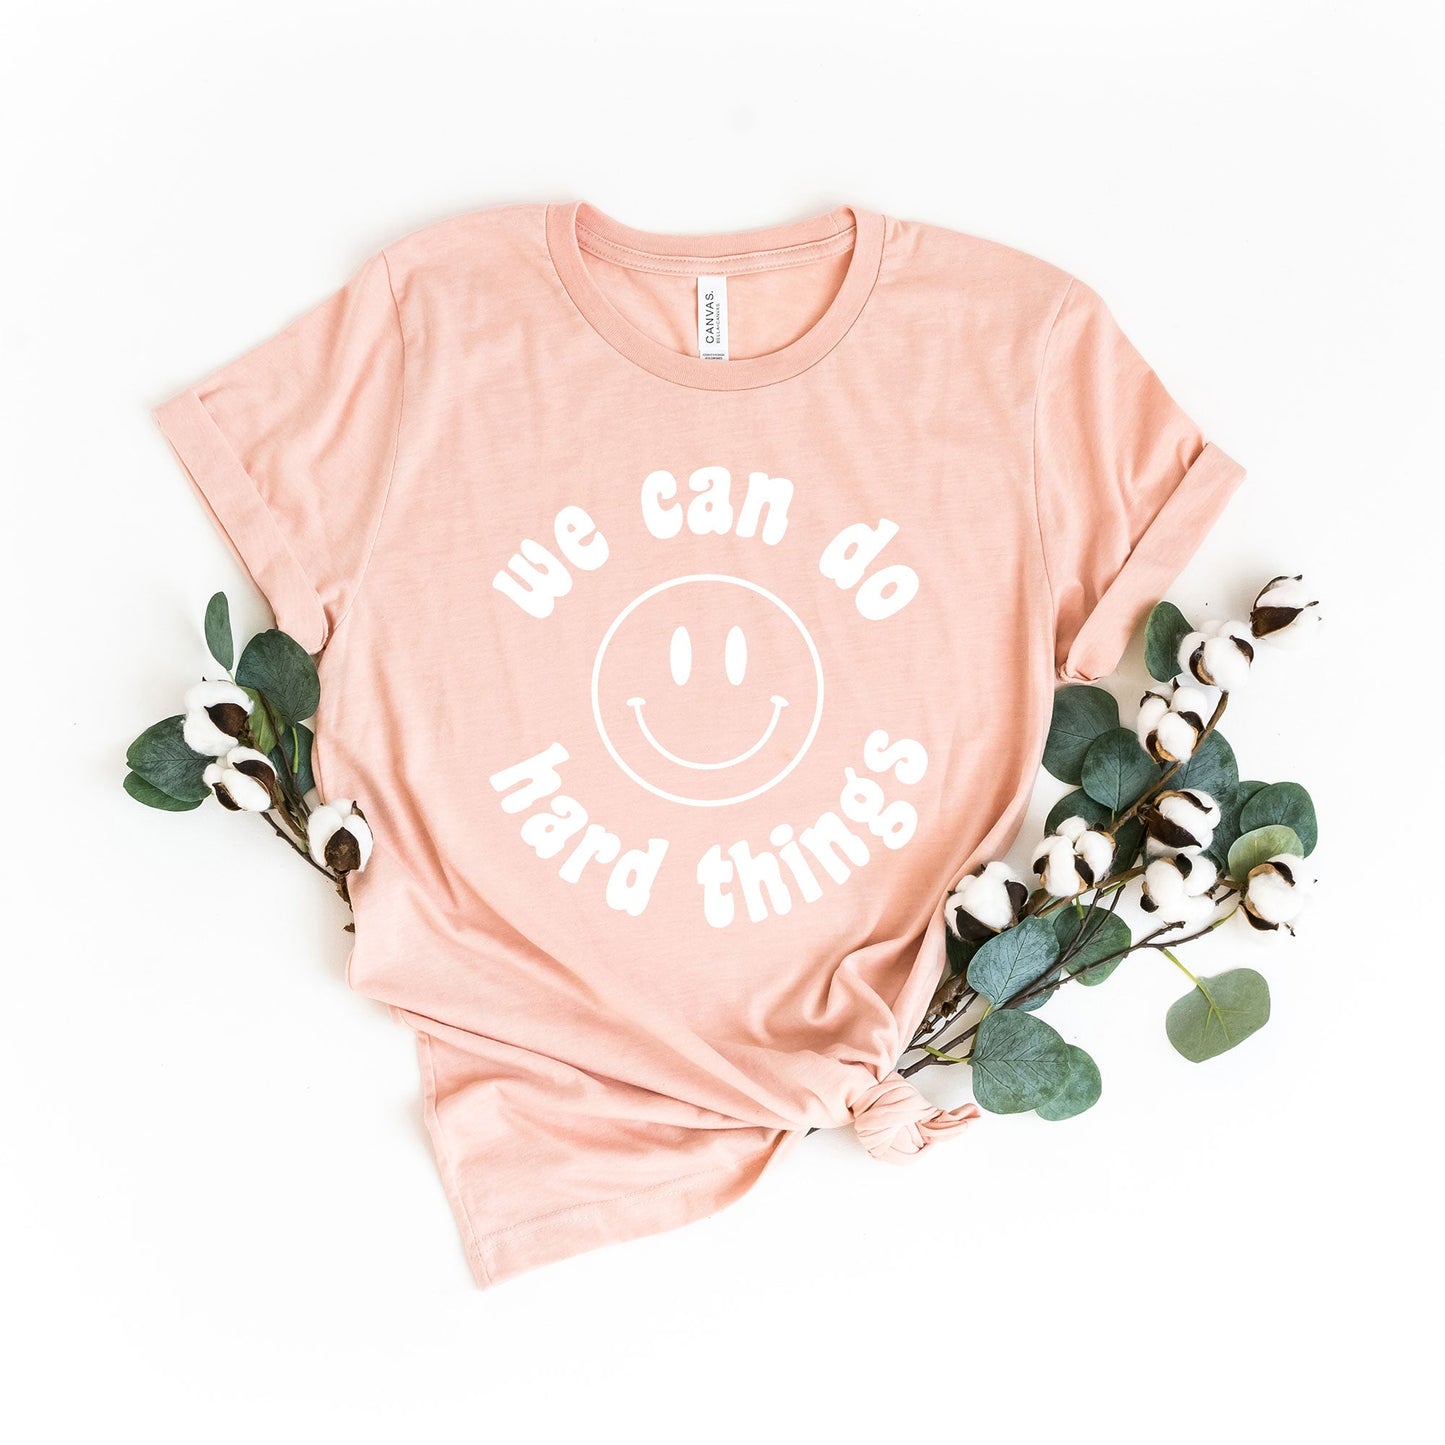 Clearance We Can Do Hard Things Smiley Face | Short Sleeve Graphic Tee